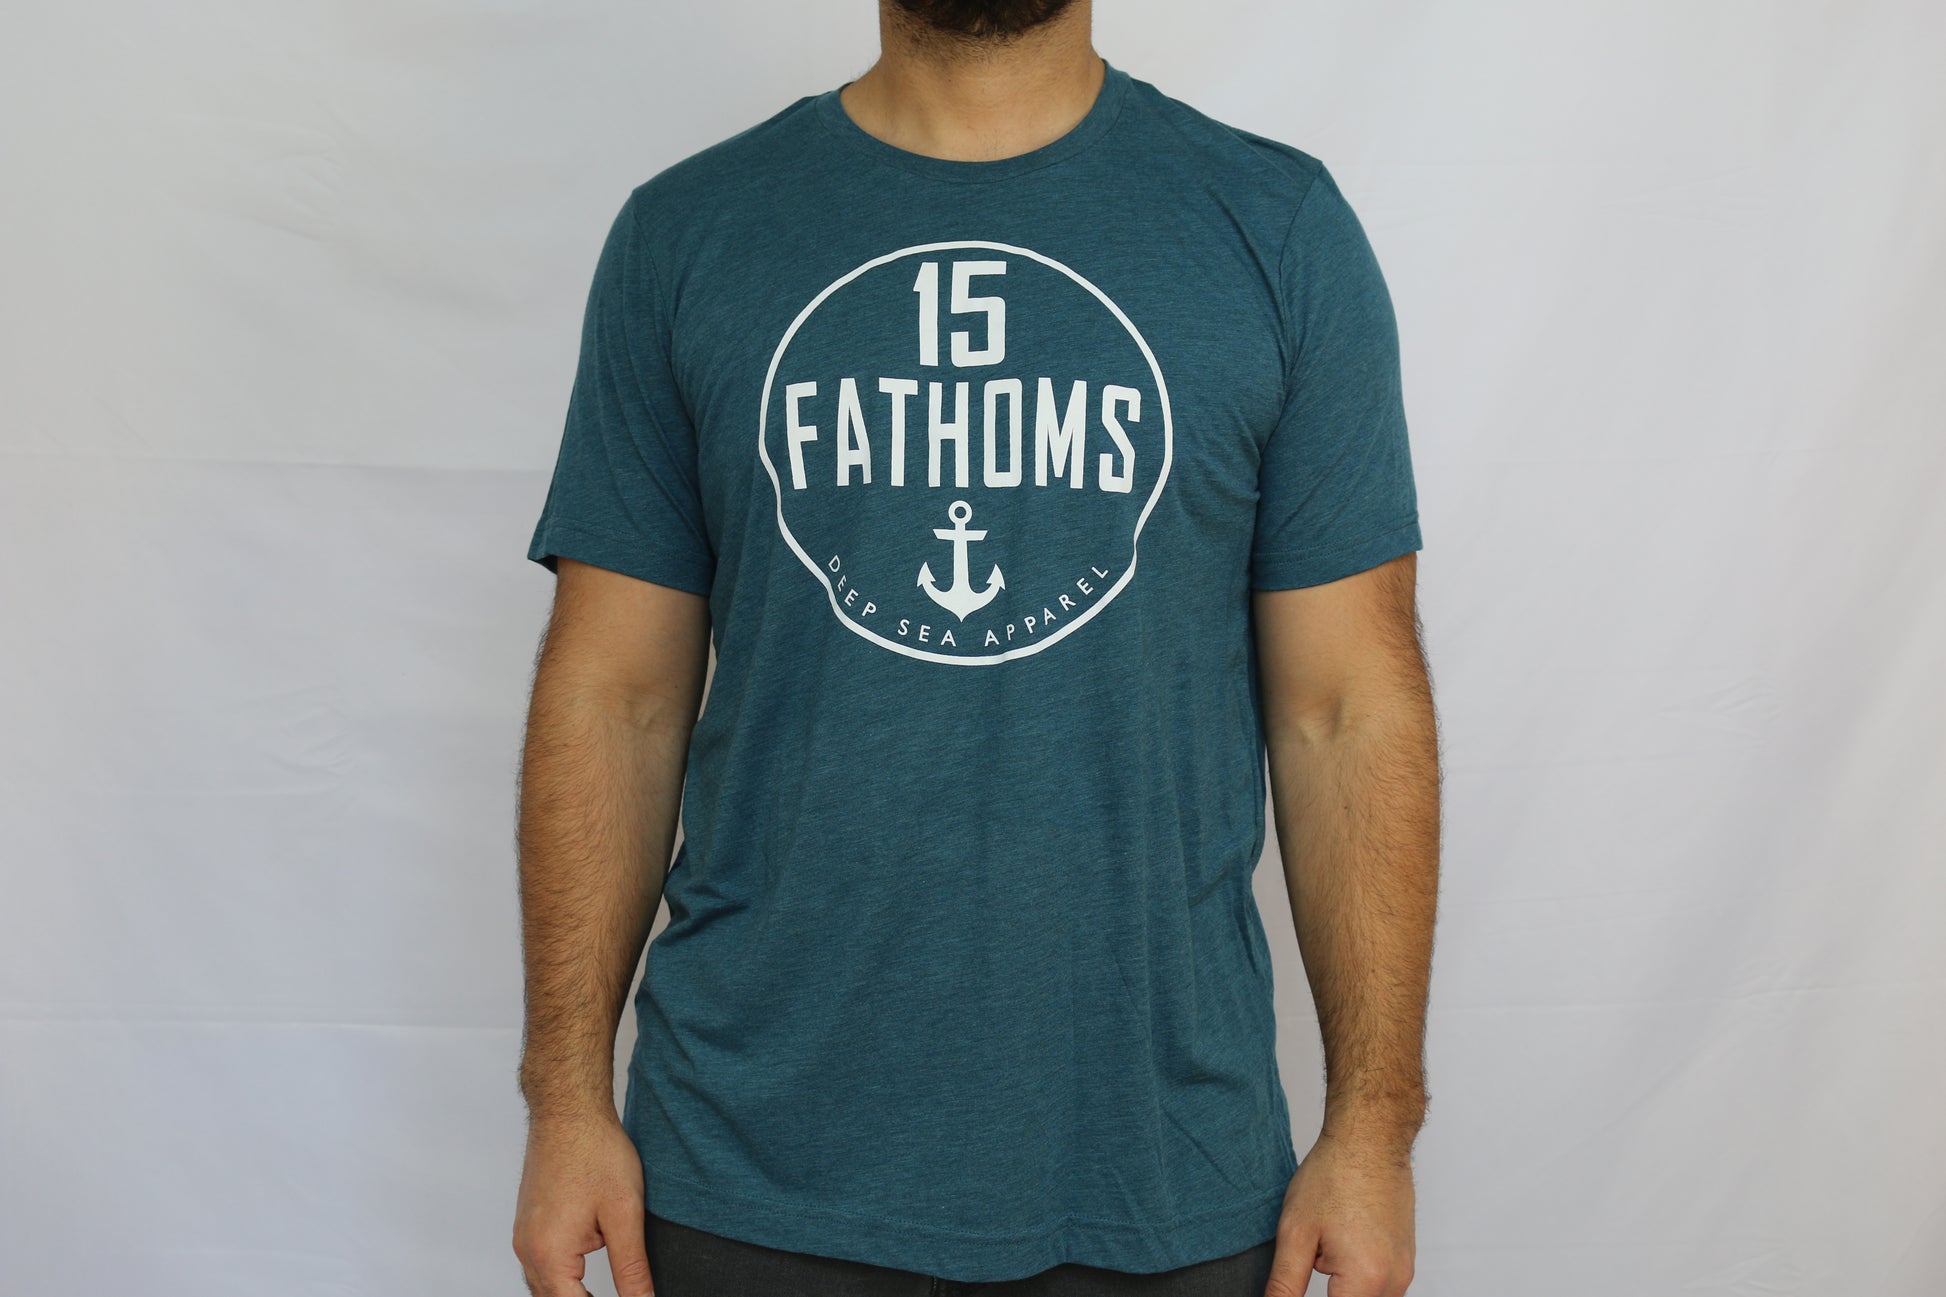 Our official logo and our very first design, this classic tee is soft, lightweight, and versatile.  This design is a piece of 15 Fathoms history.  Created in Hawaii in 2015, this design represents strength, loyalty, and an immense love for the ocean.  We’ve updated the design and are now using higher quality materials.  Don't miss out on owning a piece of 15 Fathoms history.  